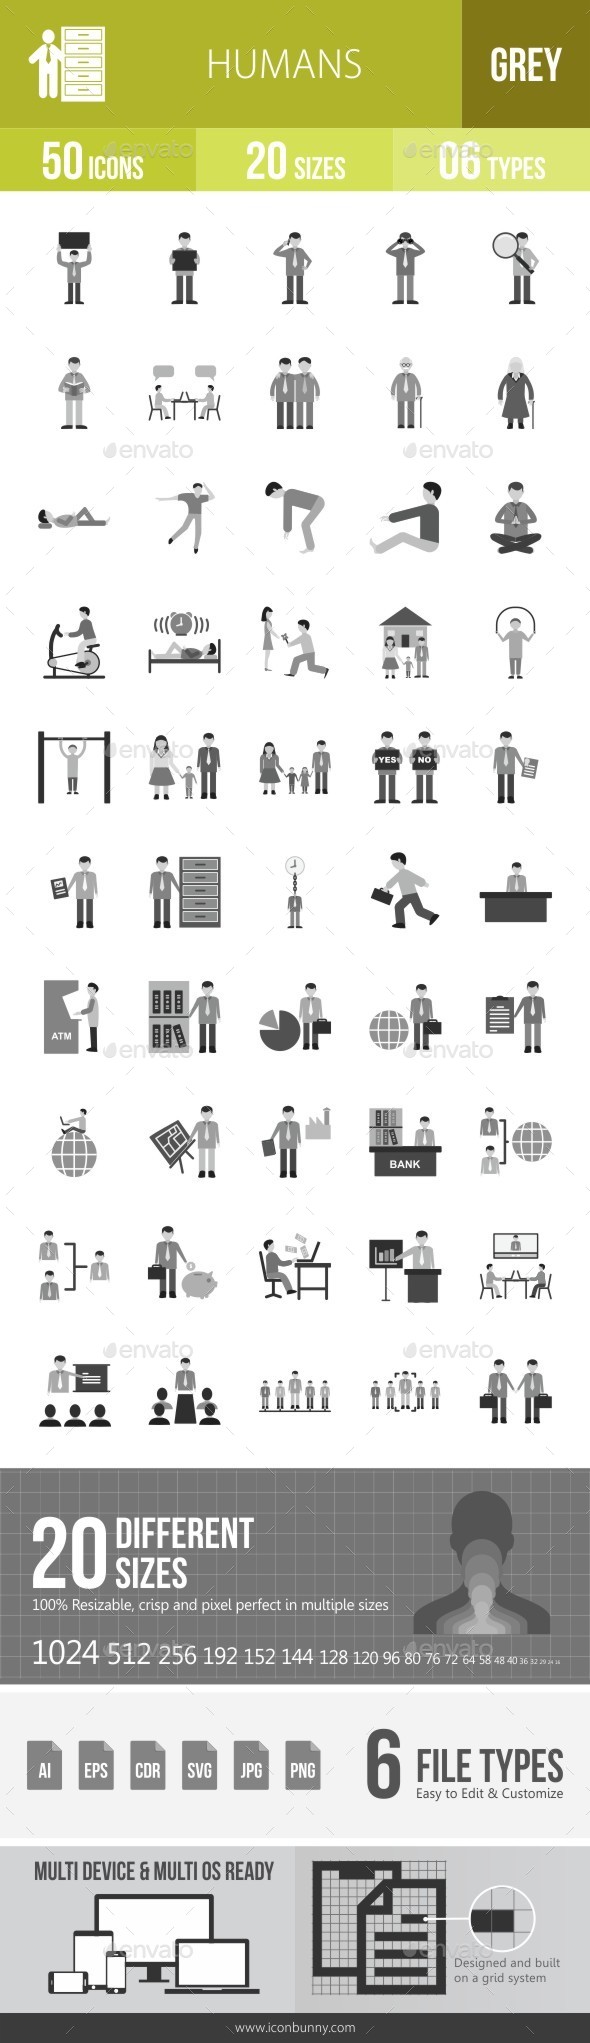 Humans Greyscale Icons